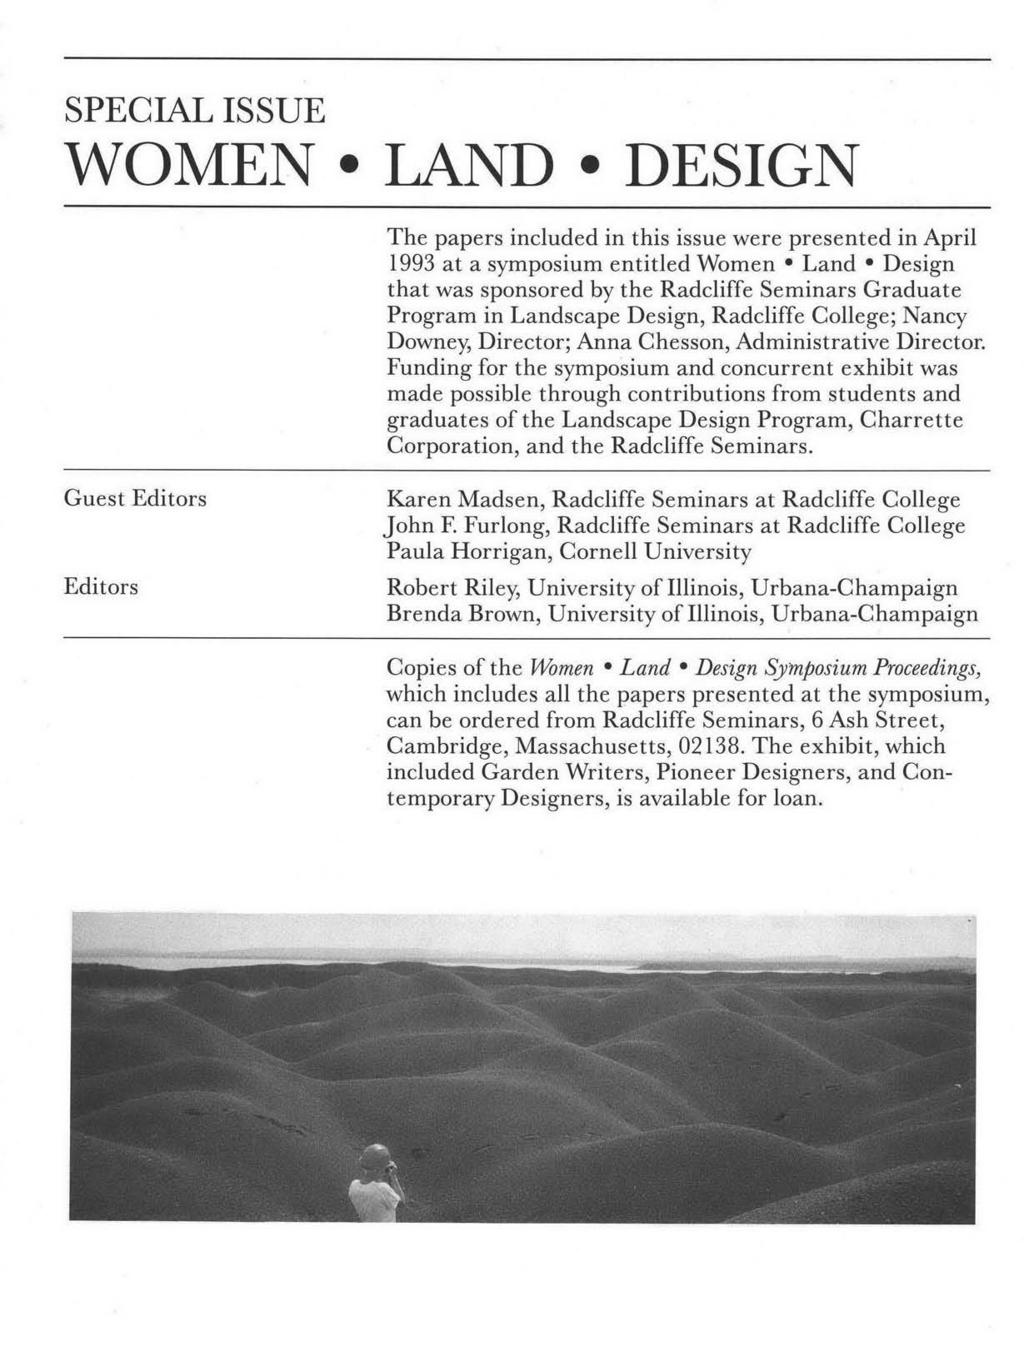 SPECIAL ISSUE WOMEN LAND DESIGN The papers included in this issue were presented in April 1993 at a symposium entitled Women Land Design that was sponsored by the Radcliffe Seminars Graduate Program